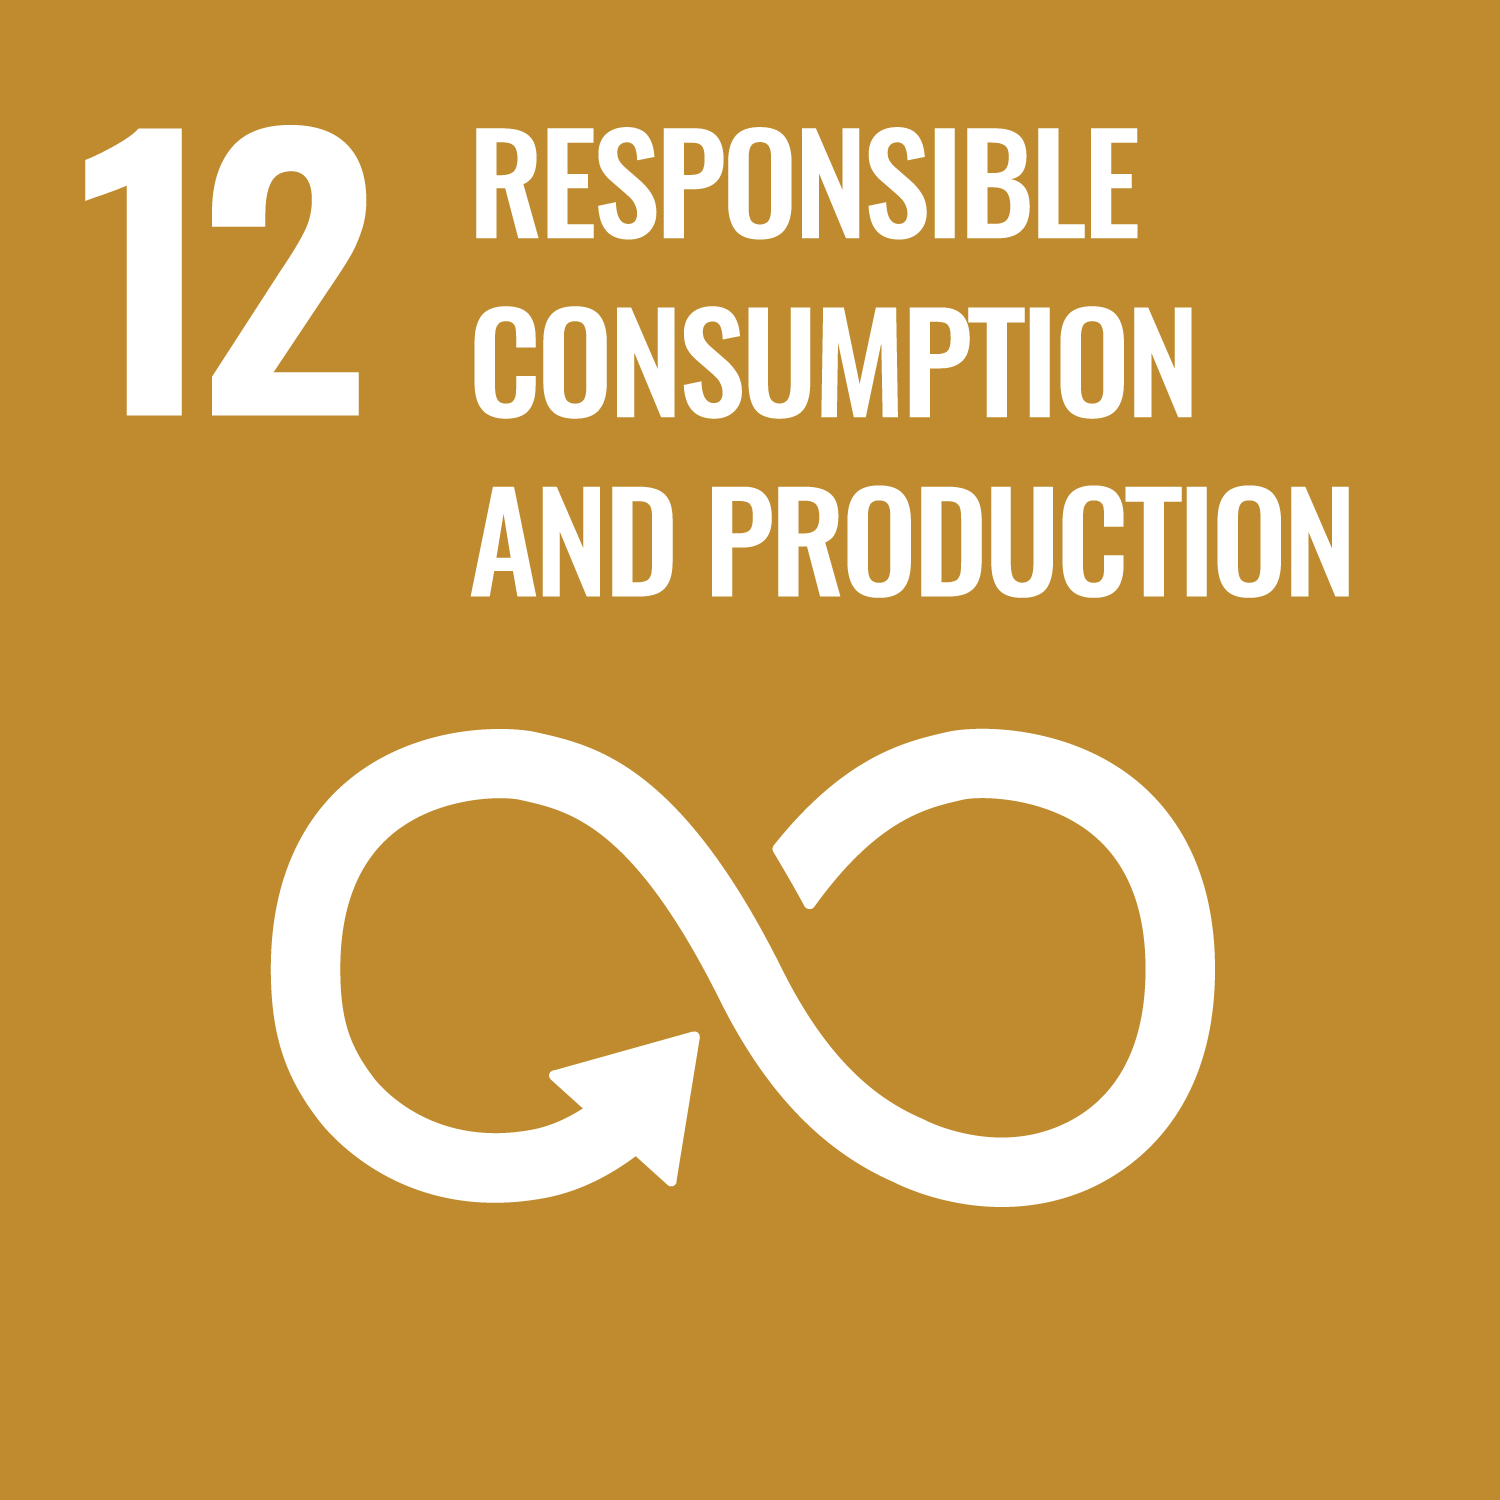 An icon for UN SDG #12 - Responsible Consumption and Production. It depicts an infinity symbol with an arrow against a brown background.